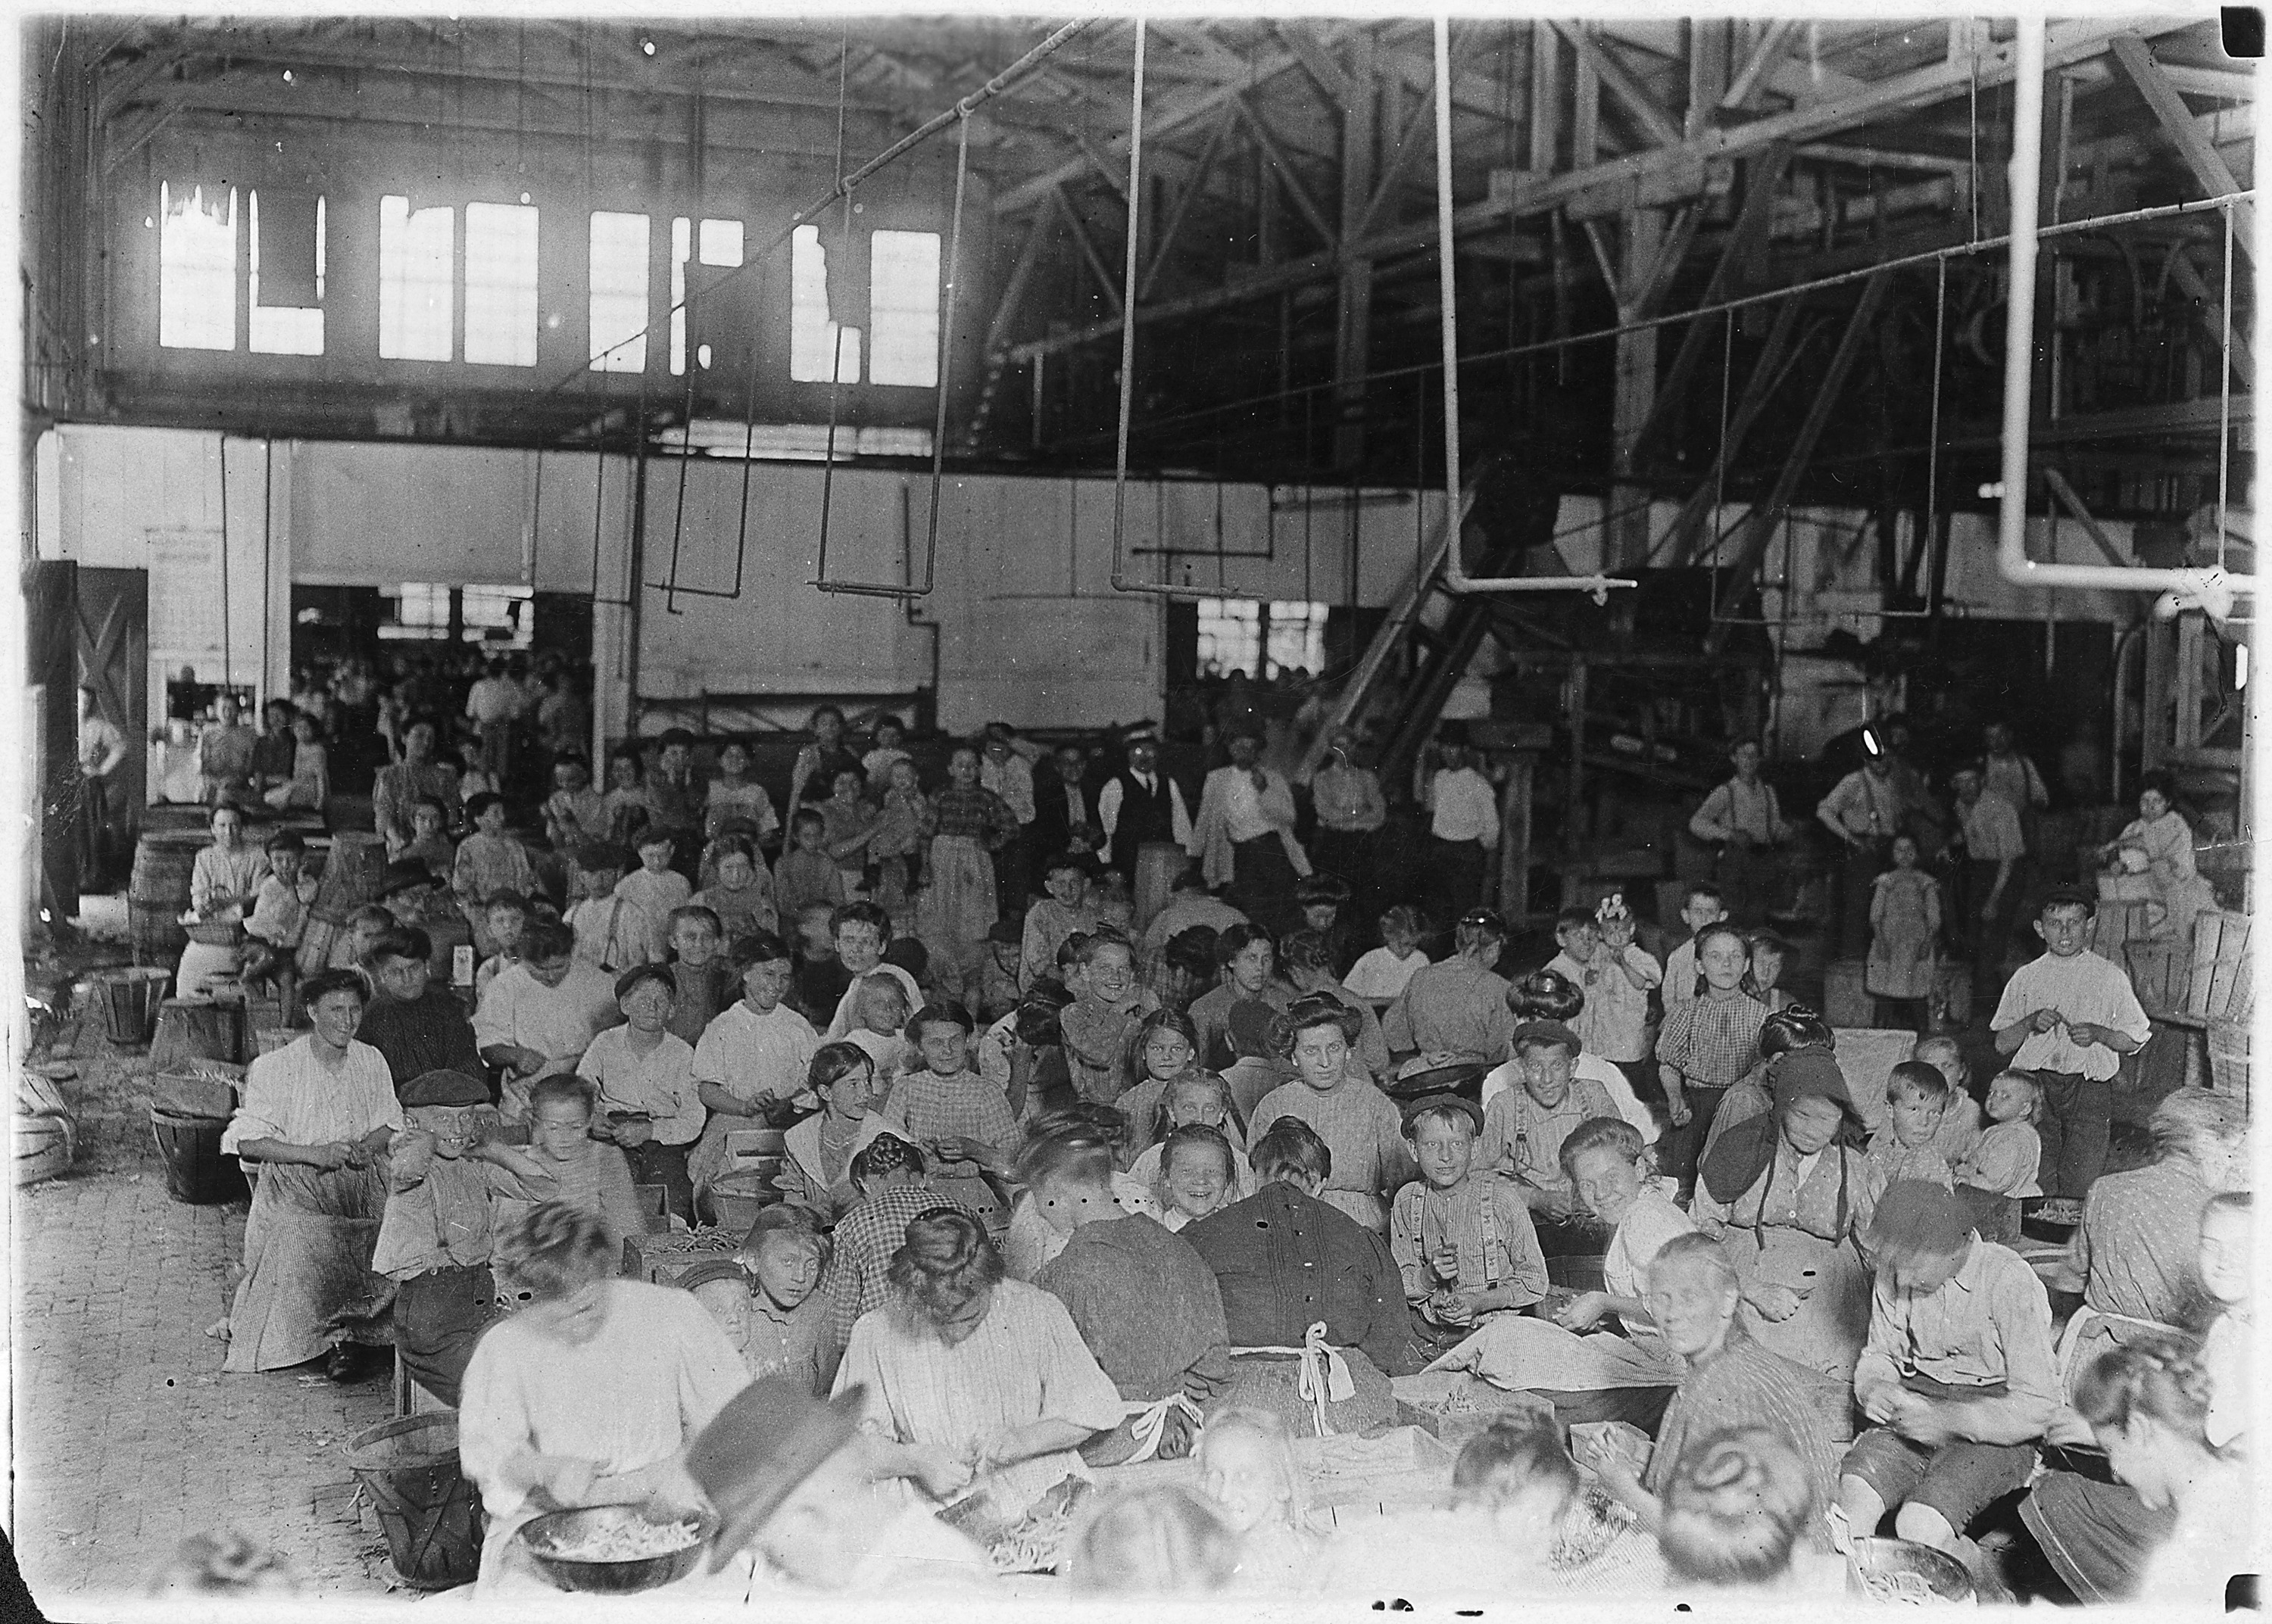 Group showing a few of the workers stringing beans in the J.S. Farrand Packing Co. Those too small to work are held... - NARA - 523214